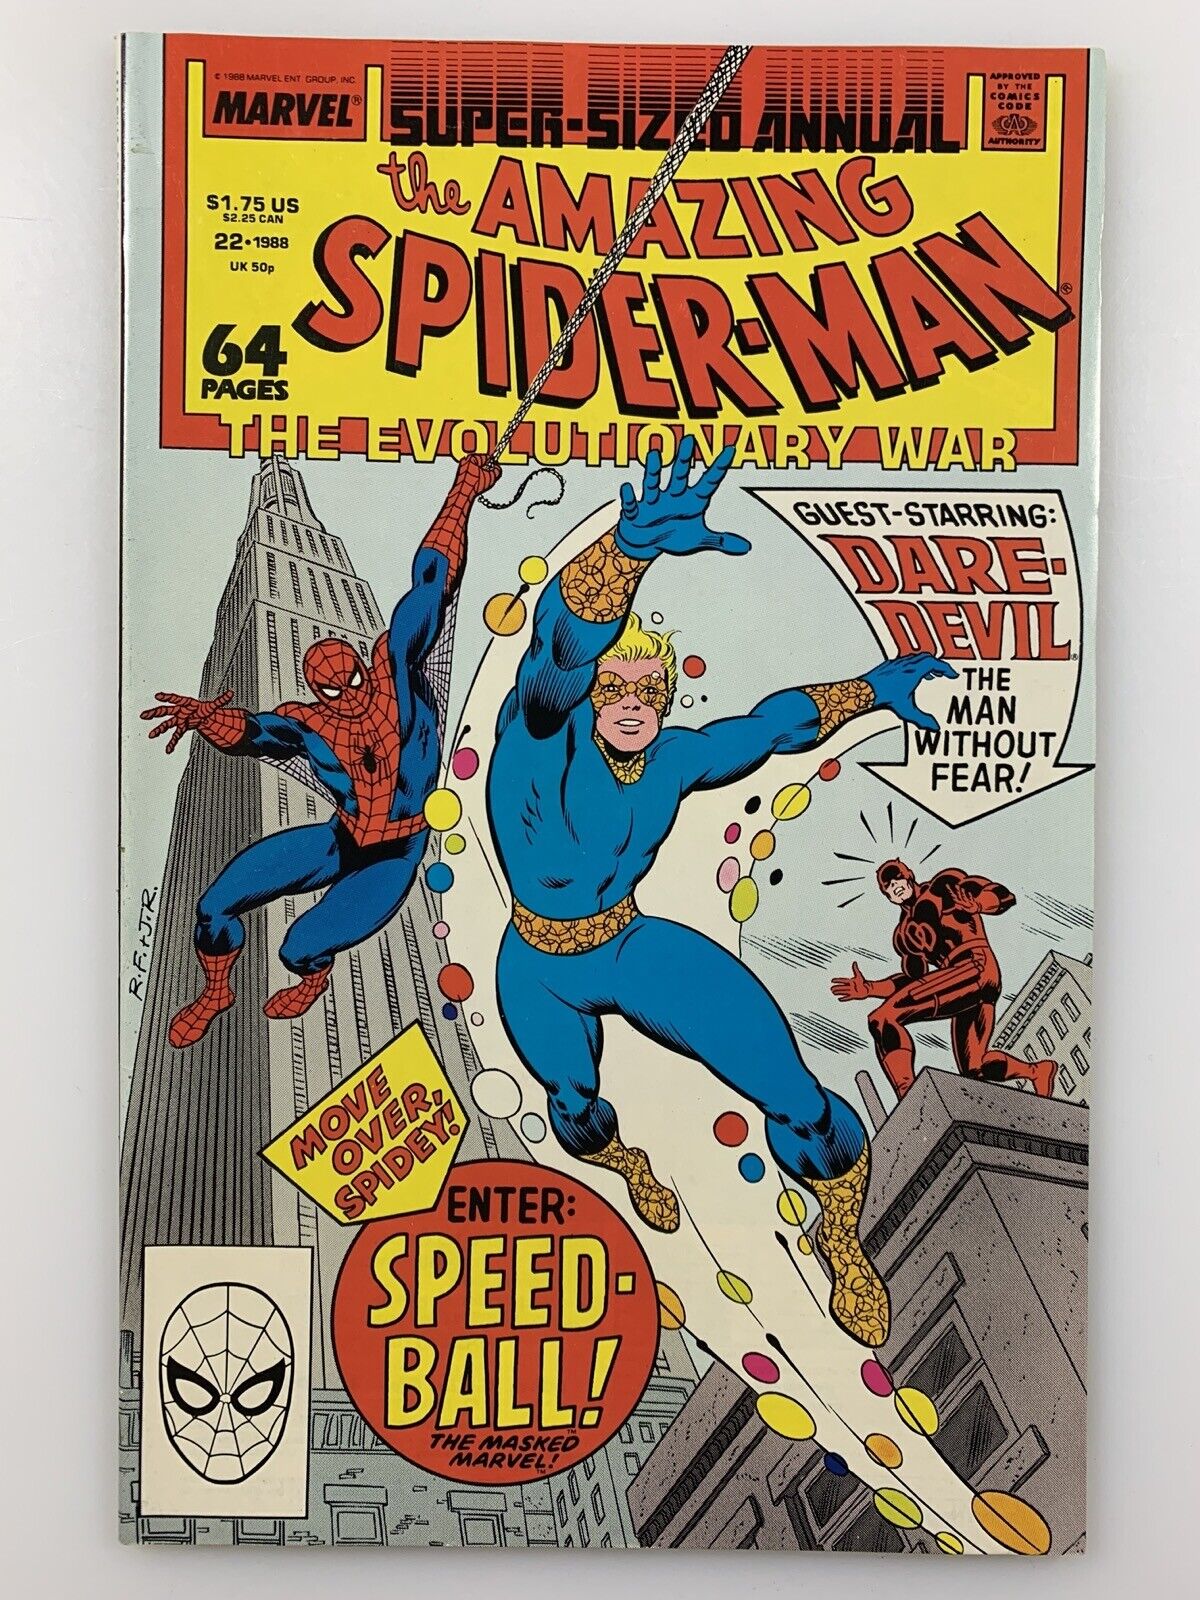 AMAZING SPIDER-MAN SUPER-SIZED ANNUAL #22 HIGH-GRADE 1988 64-PAGES MARVEL COMICS